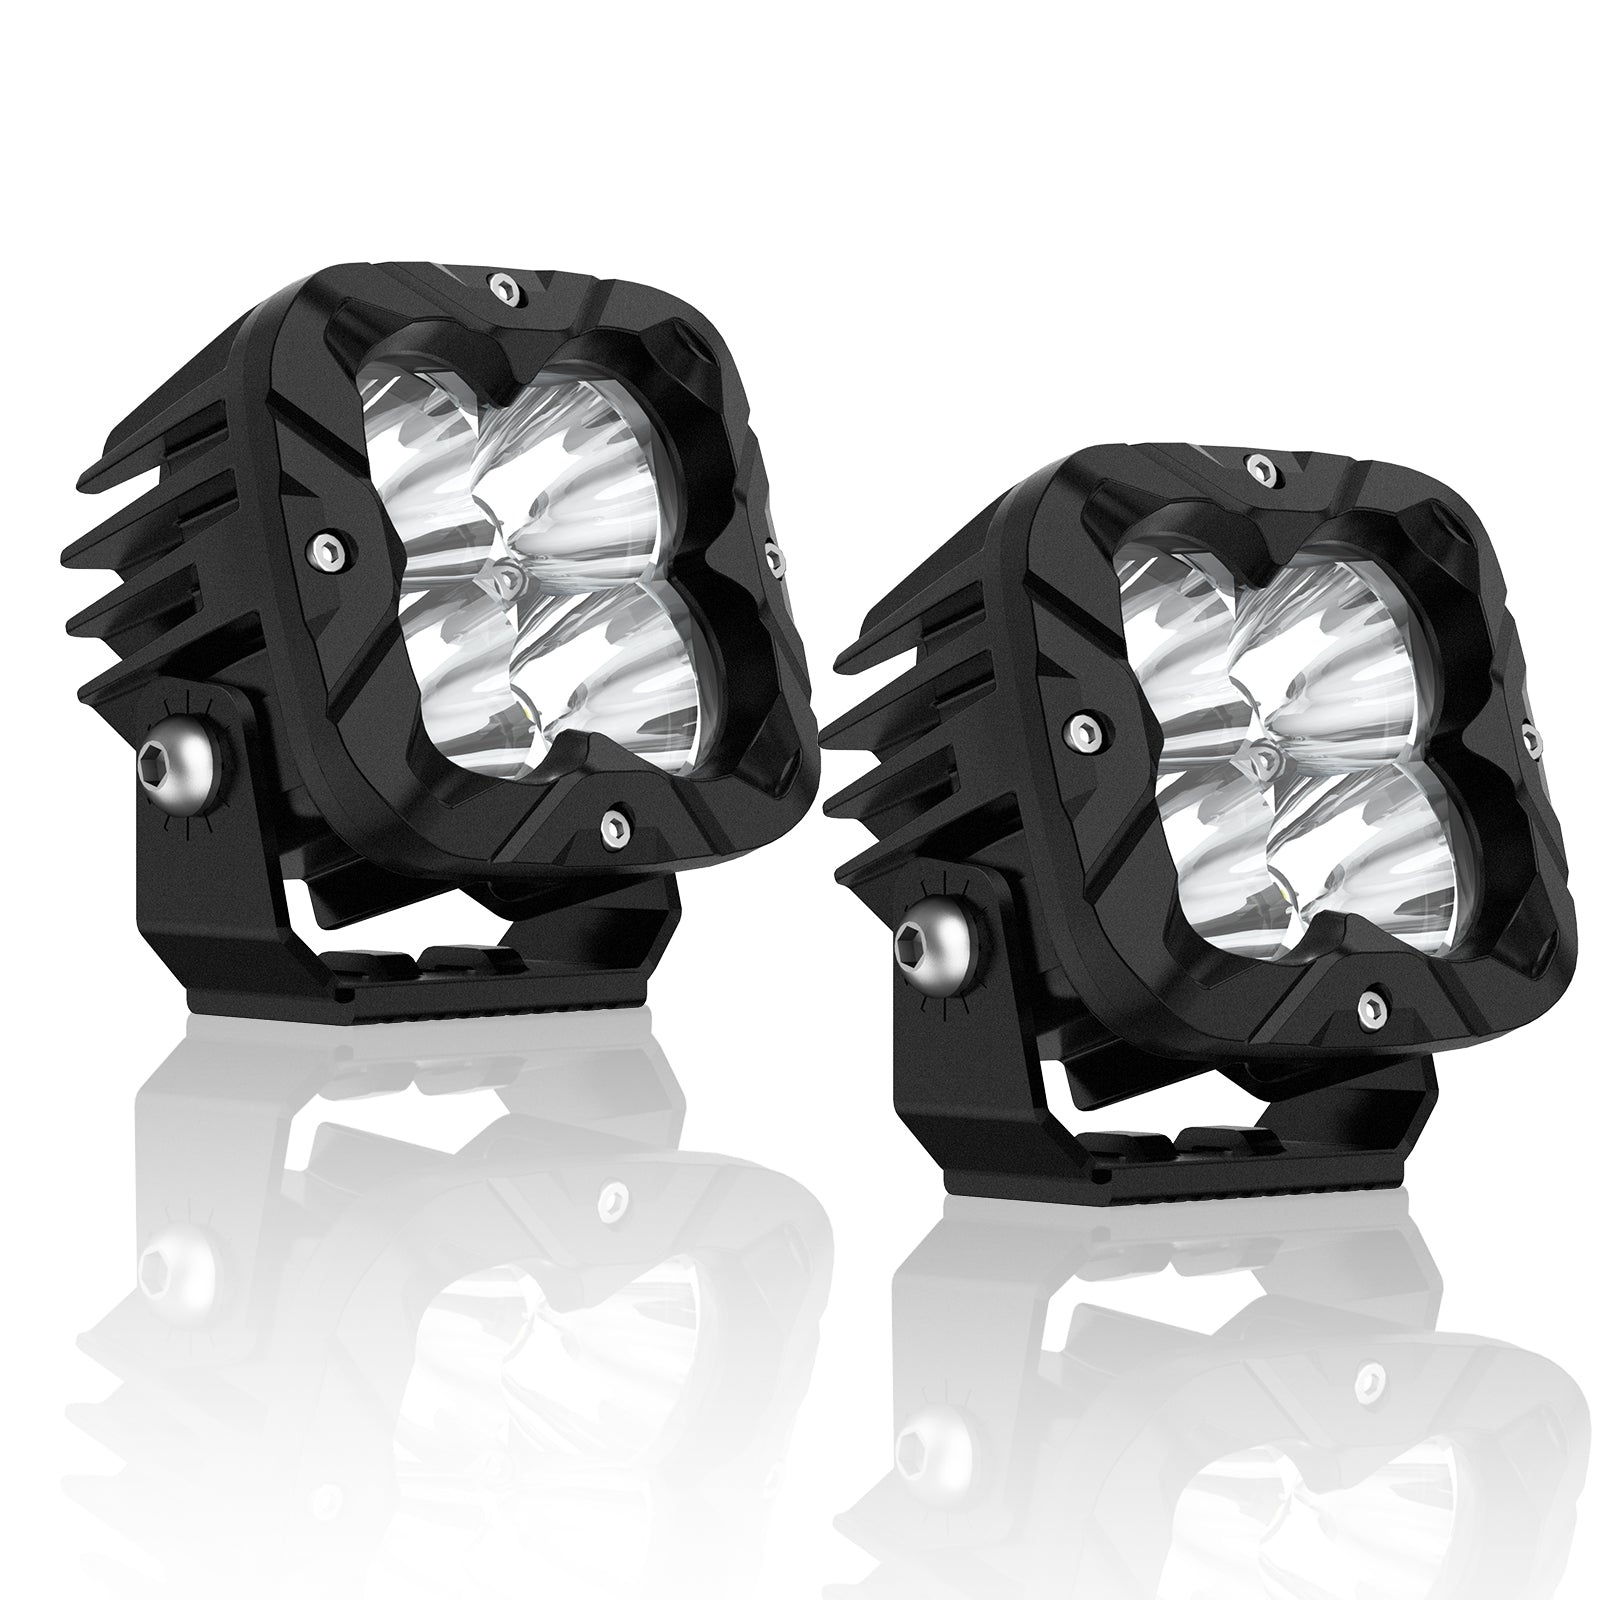 3 Inch Off-Road LED Pods Driving Spot Flood Lights with High Intensity for Truck Wrangler Jeep Ram Suv Atv Boat - NOVSIGHT